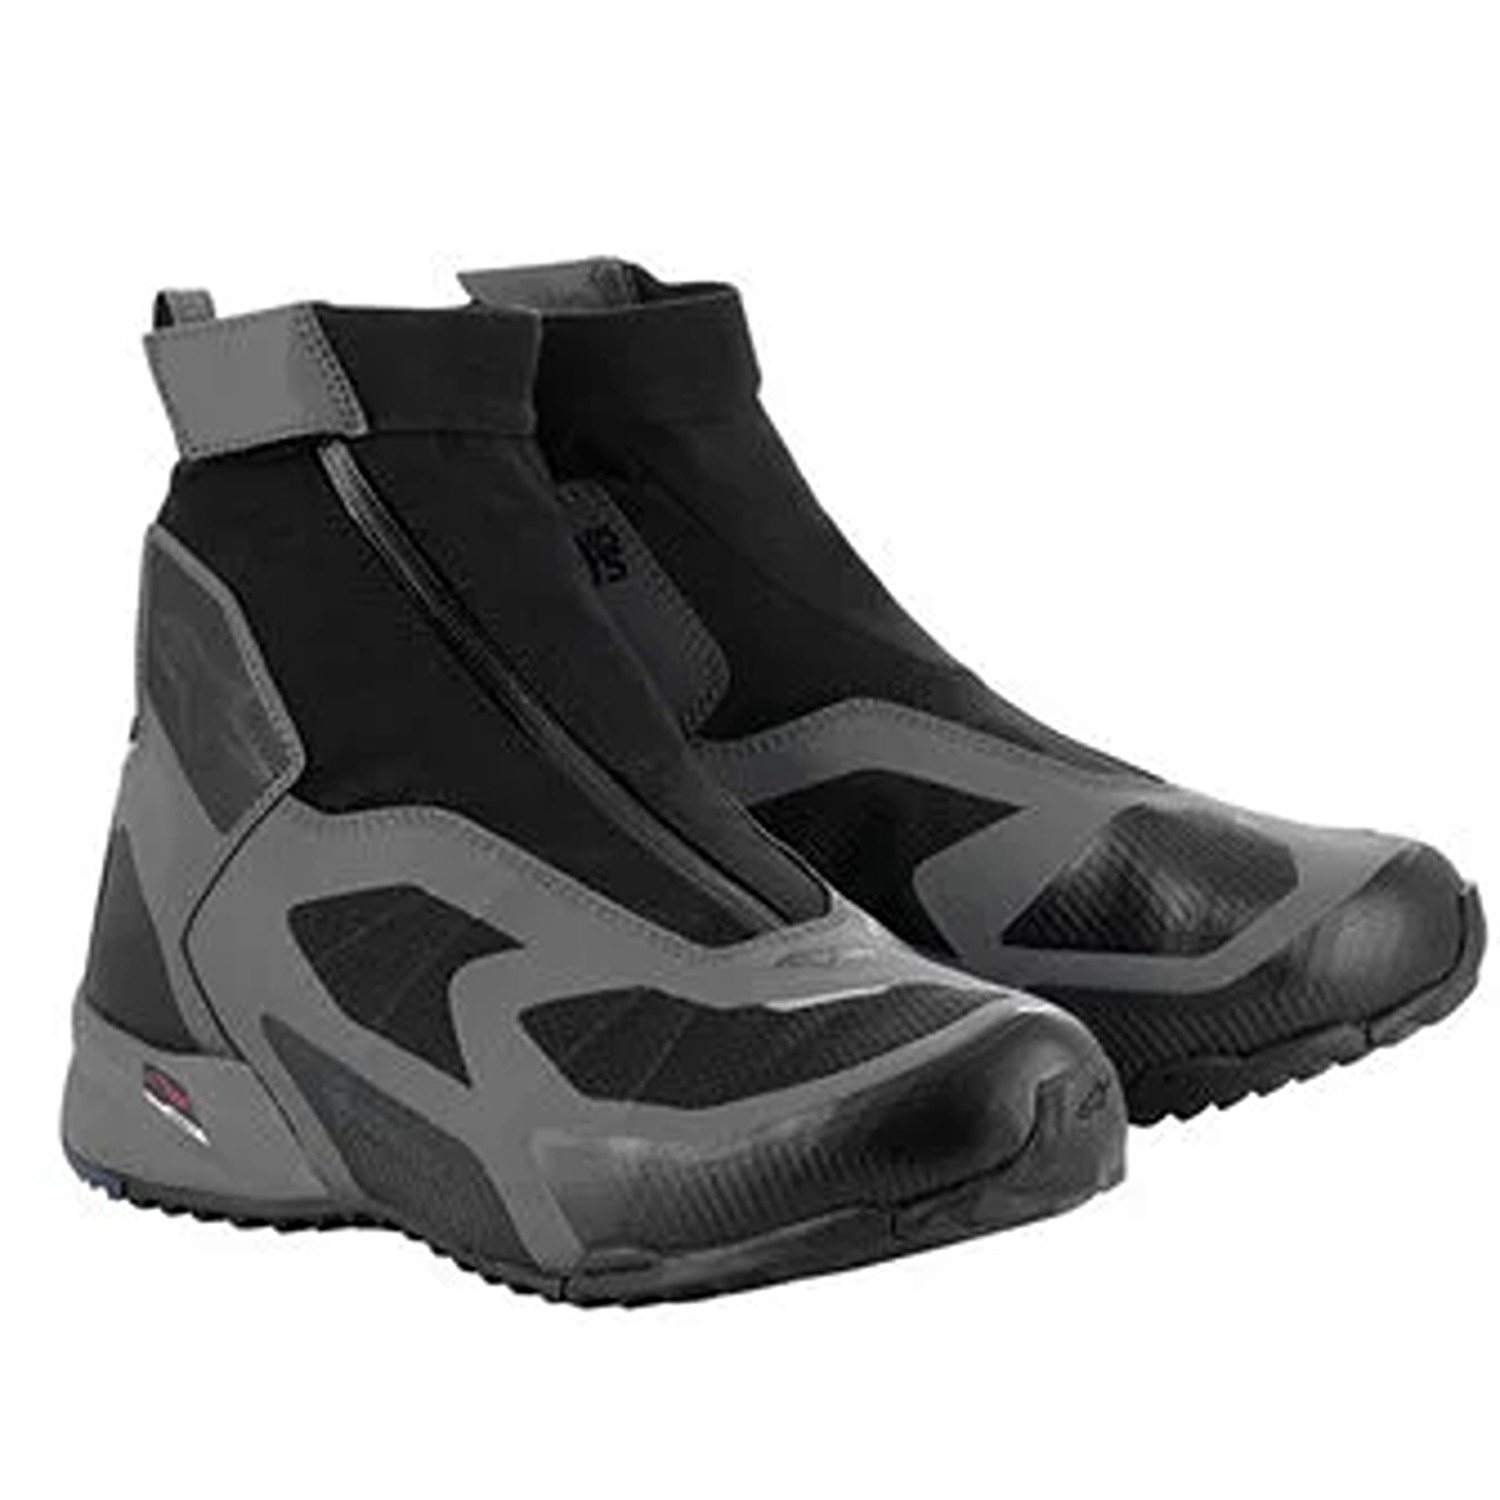 Image of Alpinestars CR-8 Gore-Tex Shoes Black Mid Gray Bright Red Size US 135 ID 8059347260266